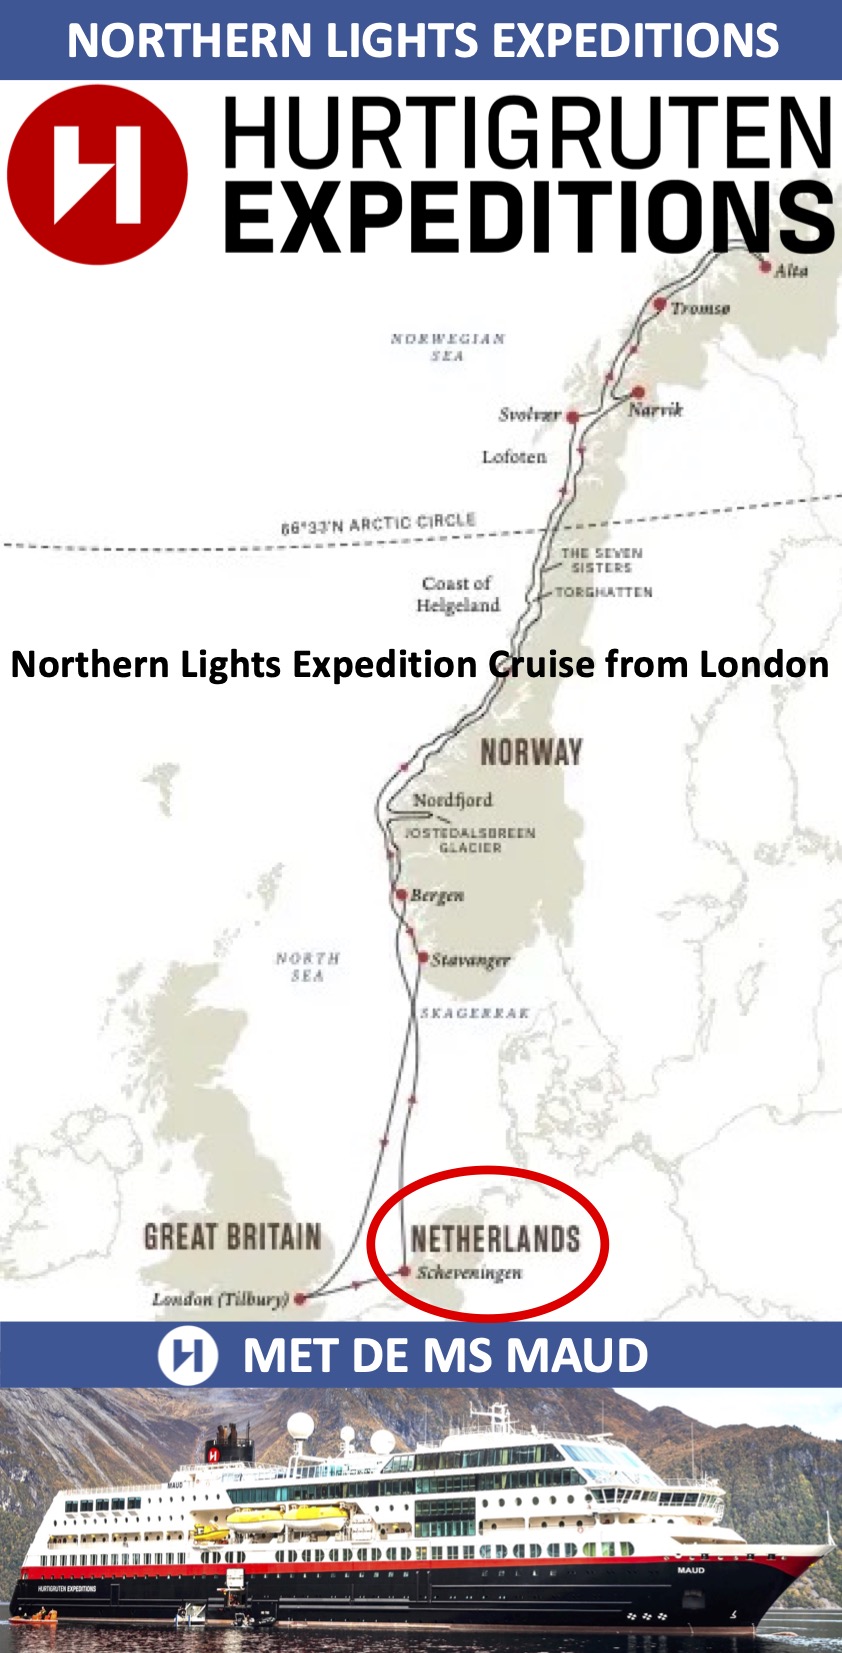 Hurtigruten Northern Lights Expedition Cruise from London